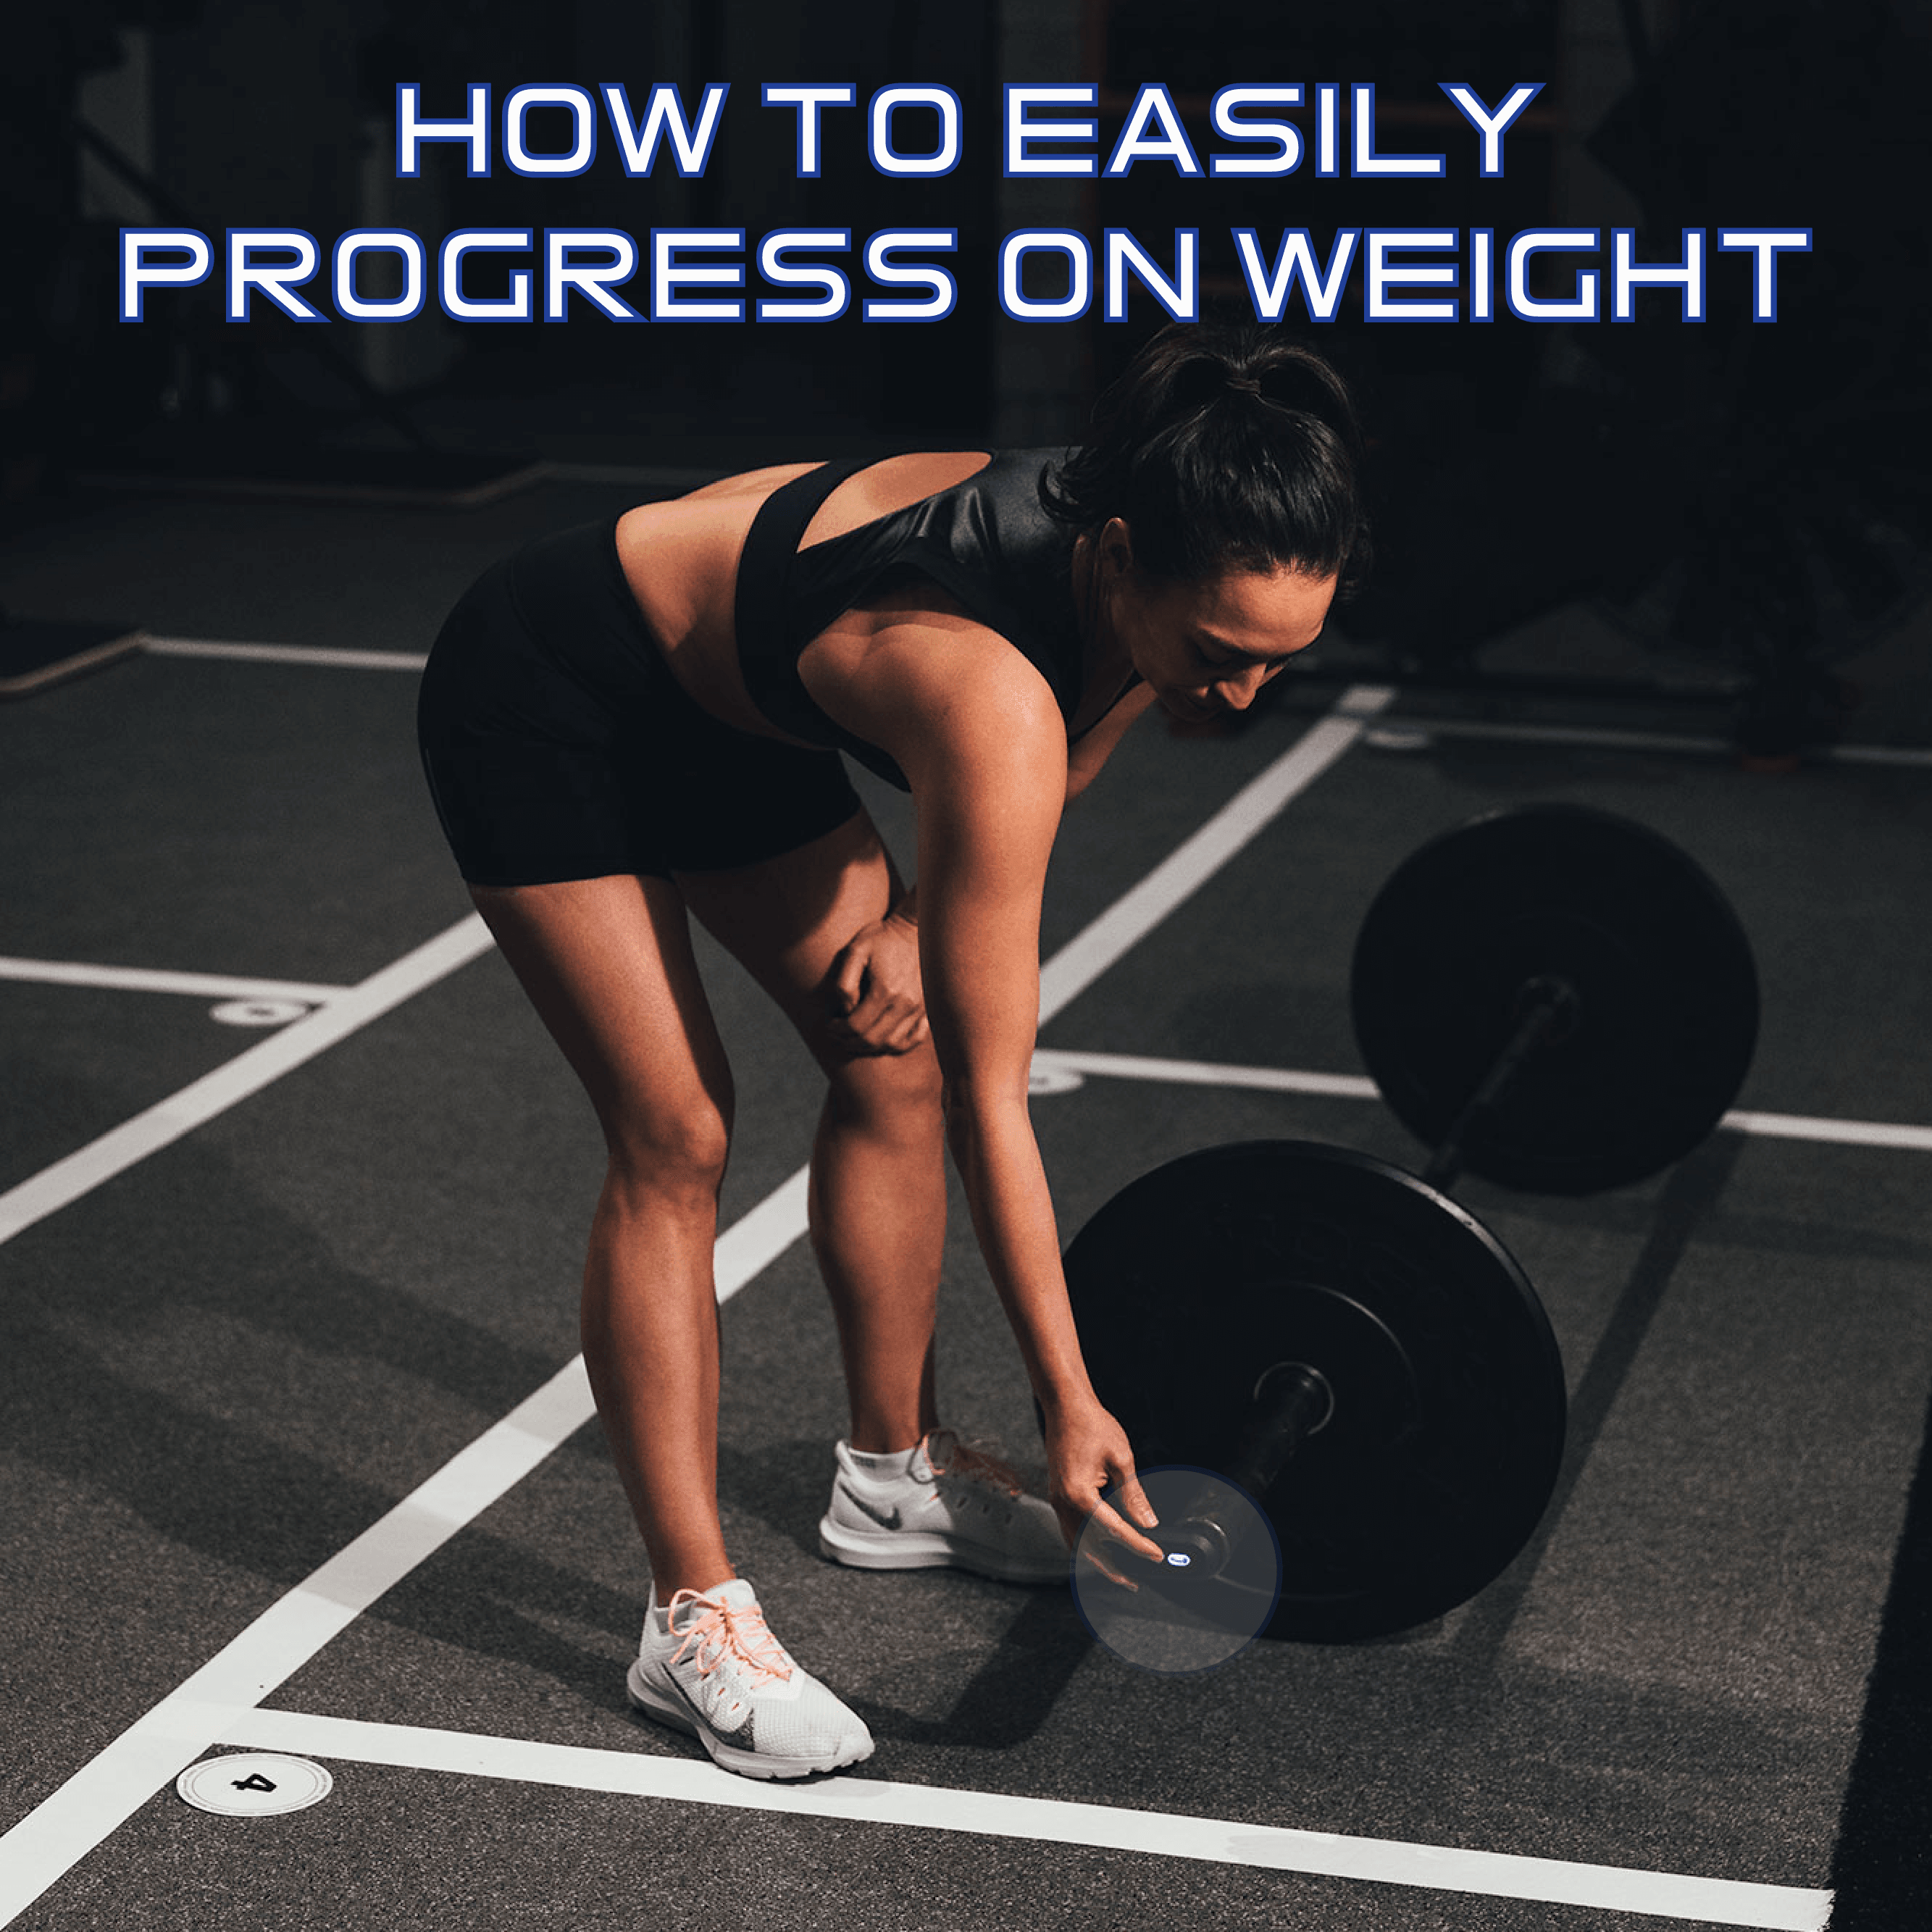 How to easily progress on weight using Calibrex